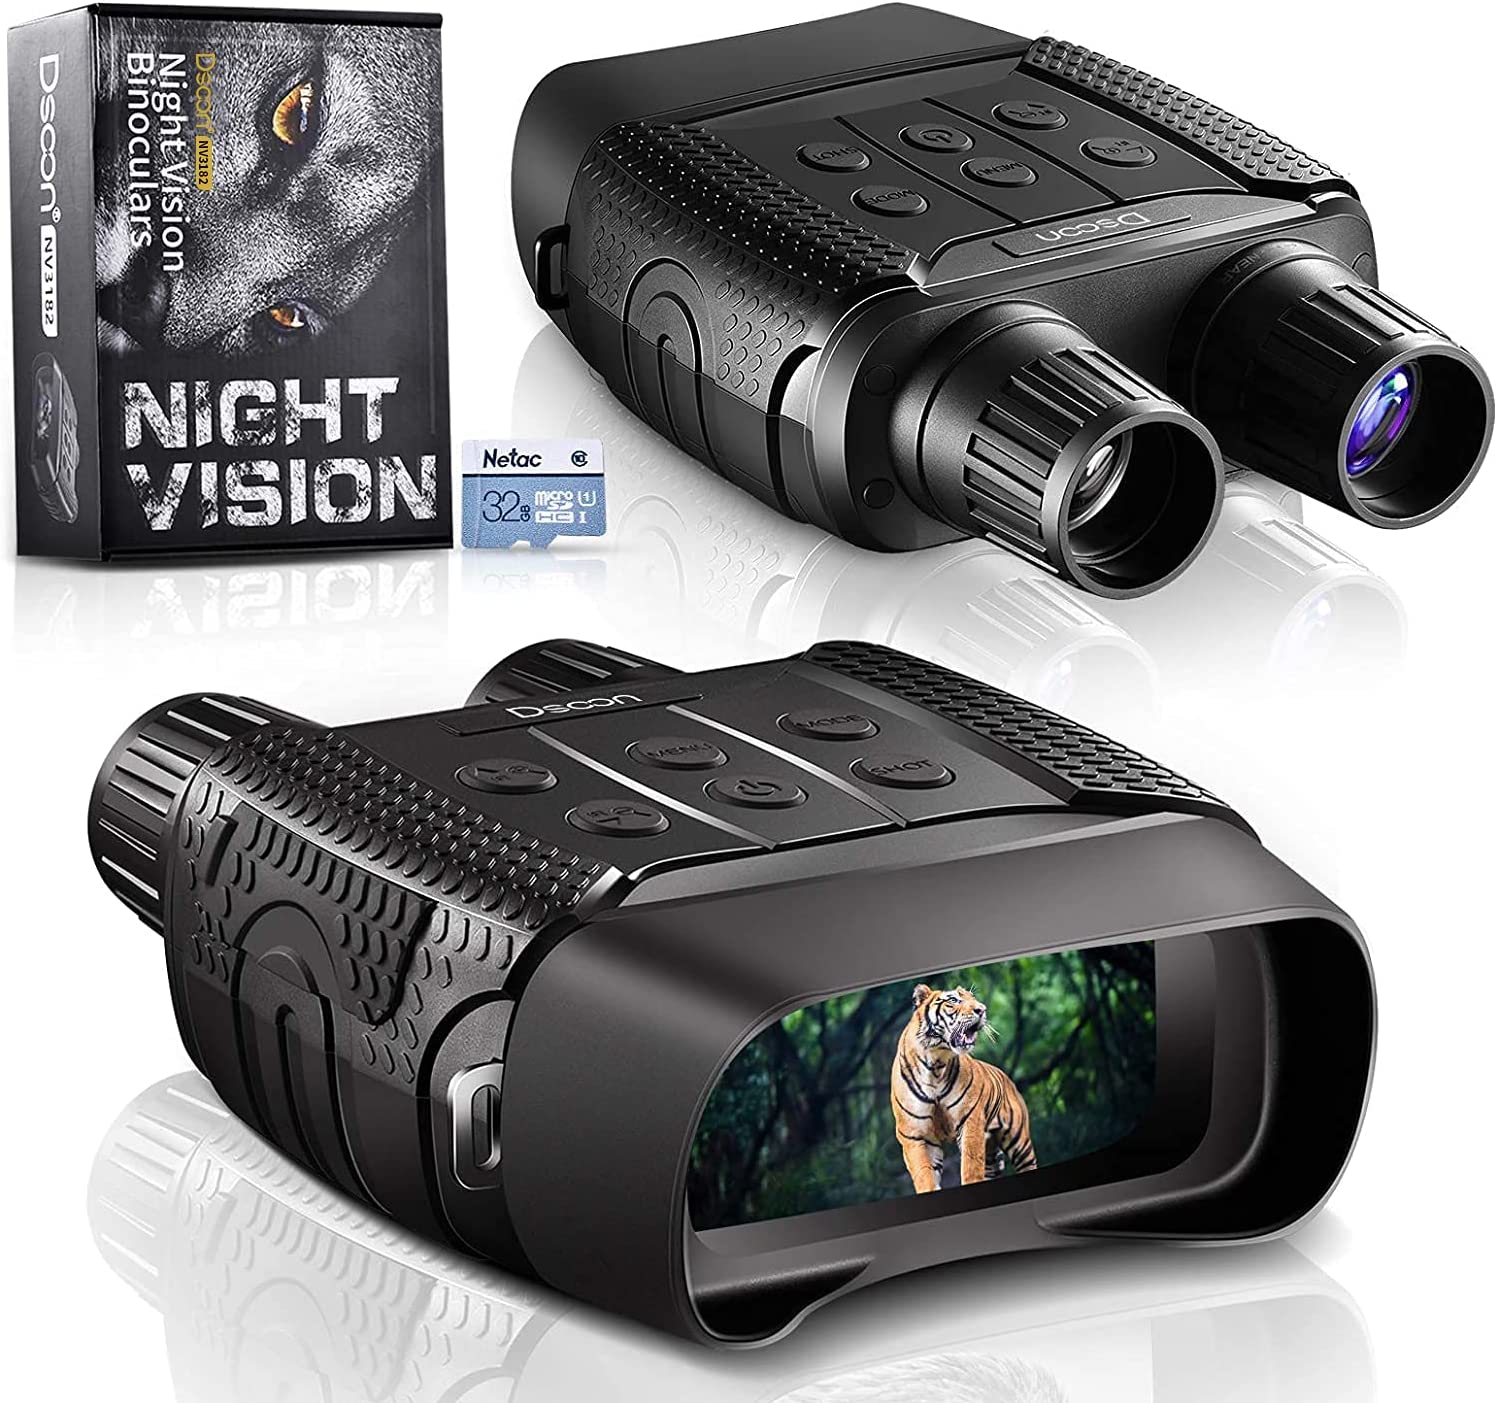 Dsoon Digital Night Vision Goggles - firewolfhunting